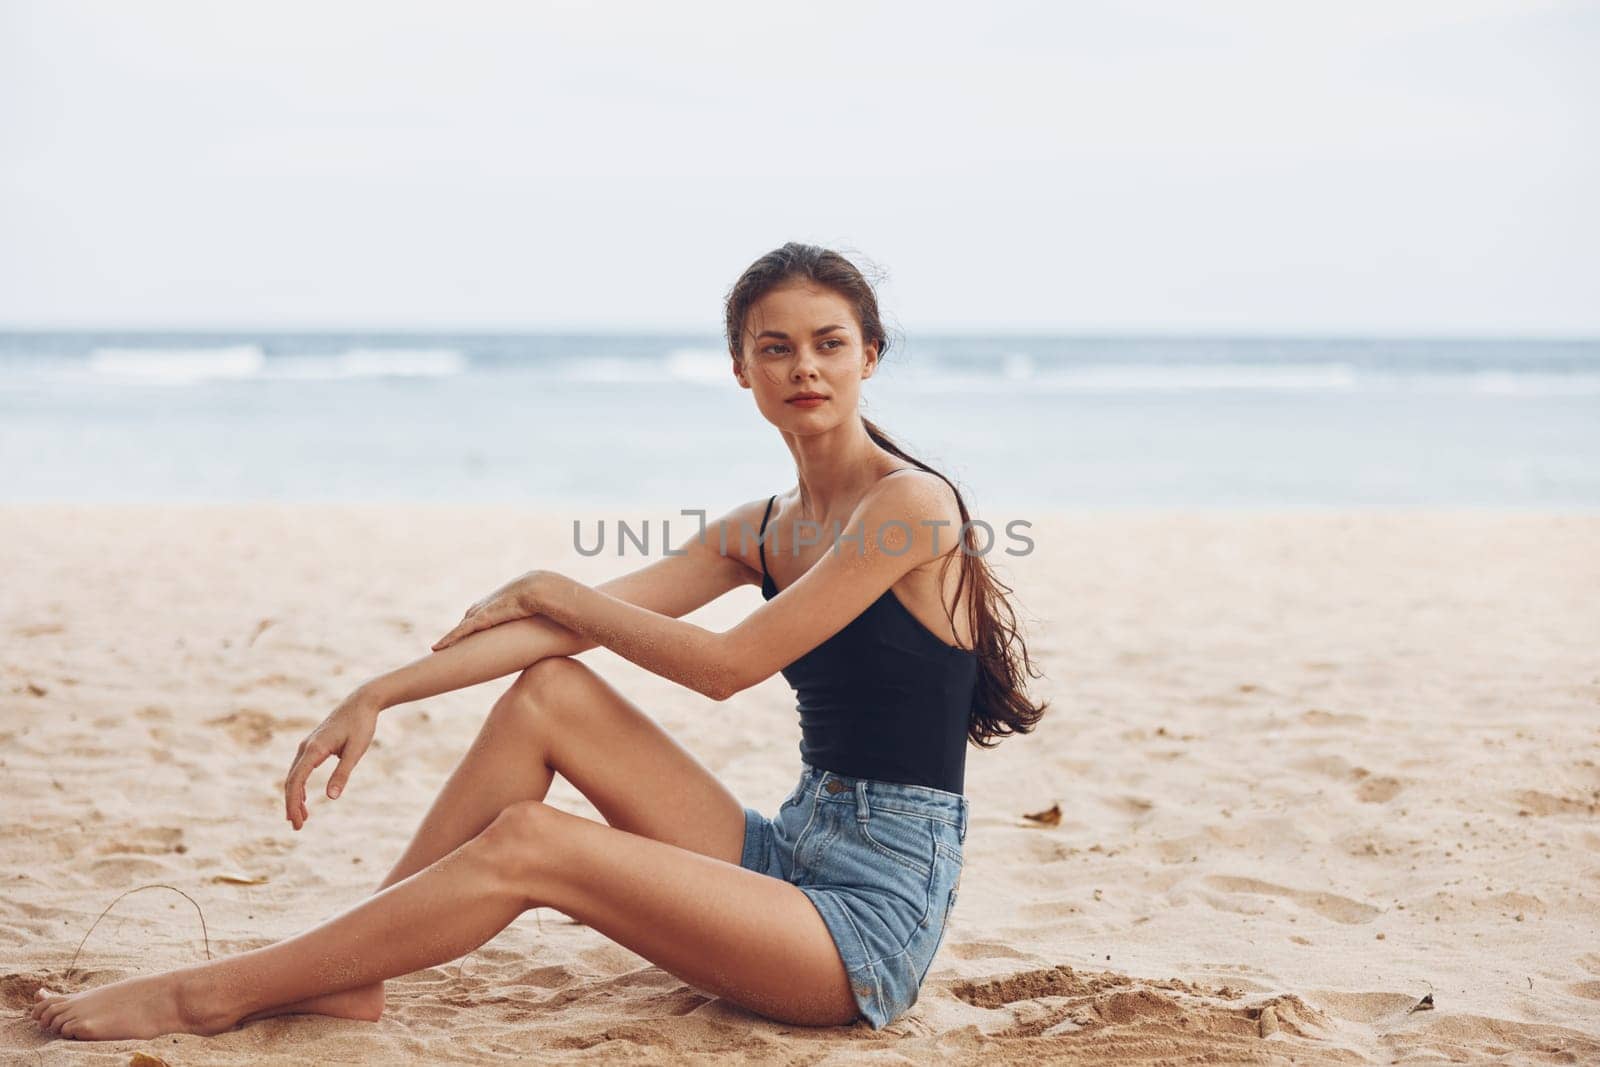 woman girl travel beach vacation coast carefree sexy sitting view sand alone model freedom nature natural sea hair water back attractive smile